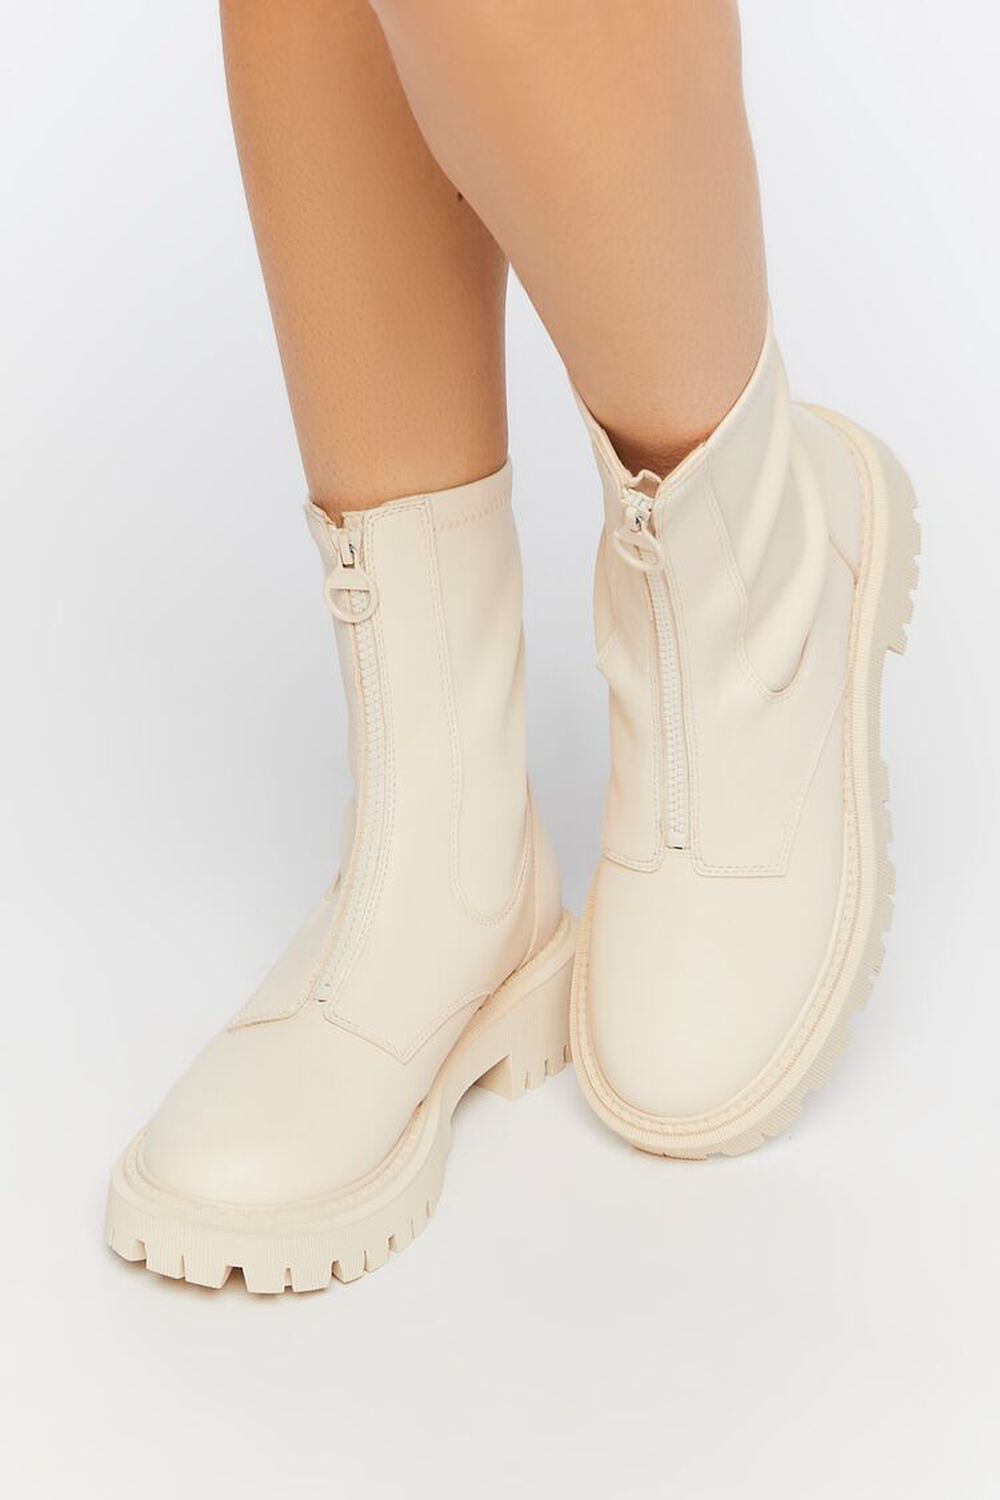 CREAM Zip-Front Faux Leather Booties, image 1